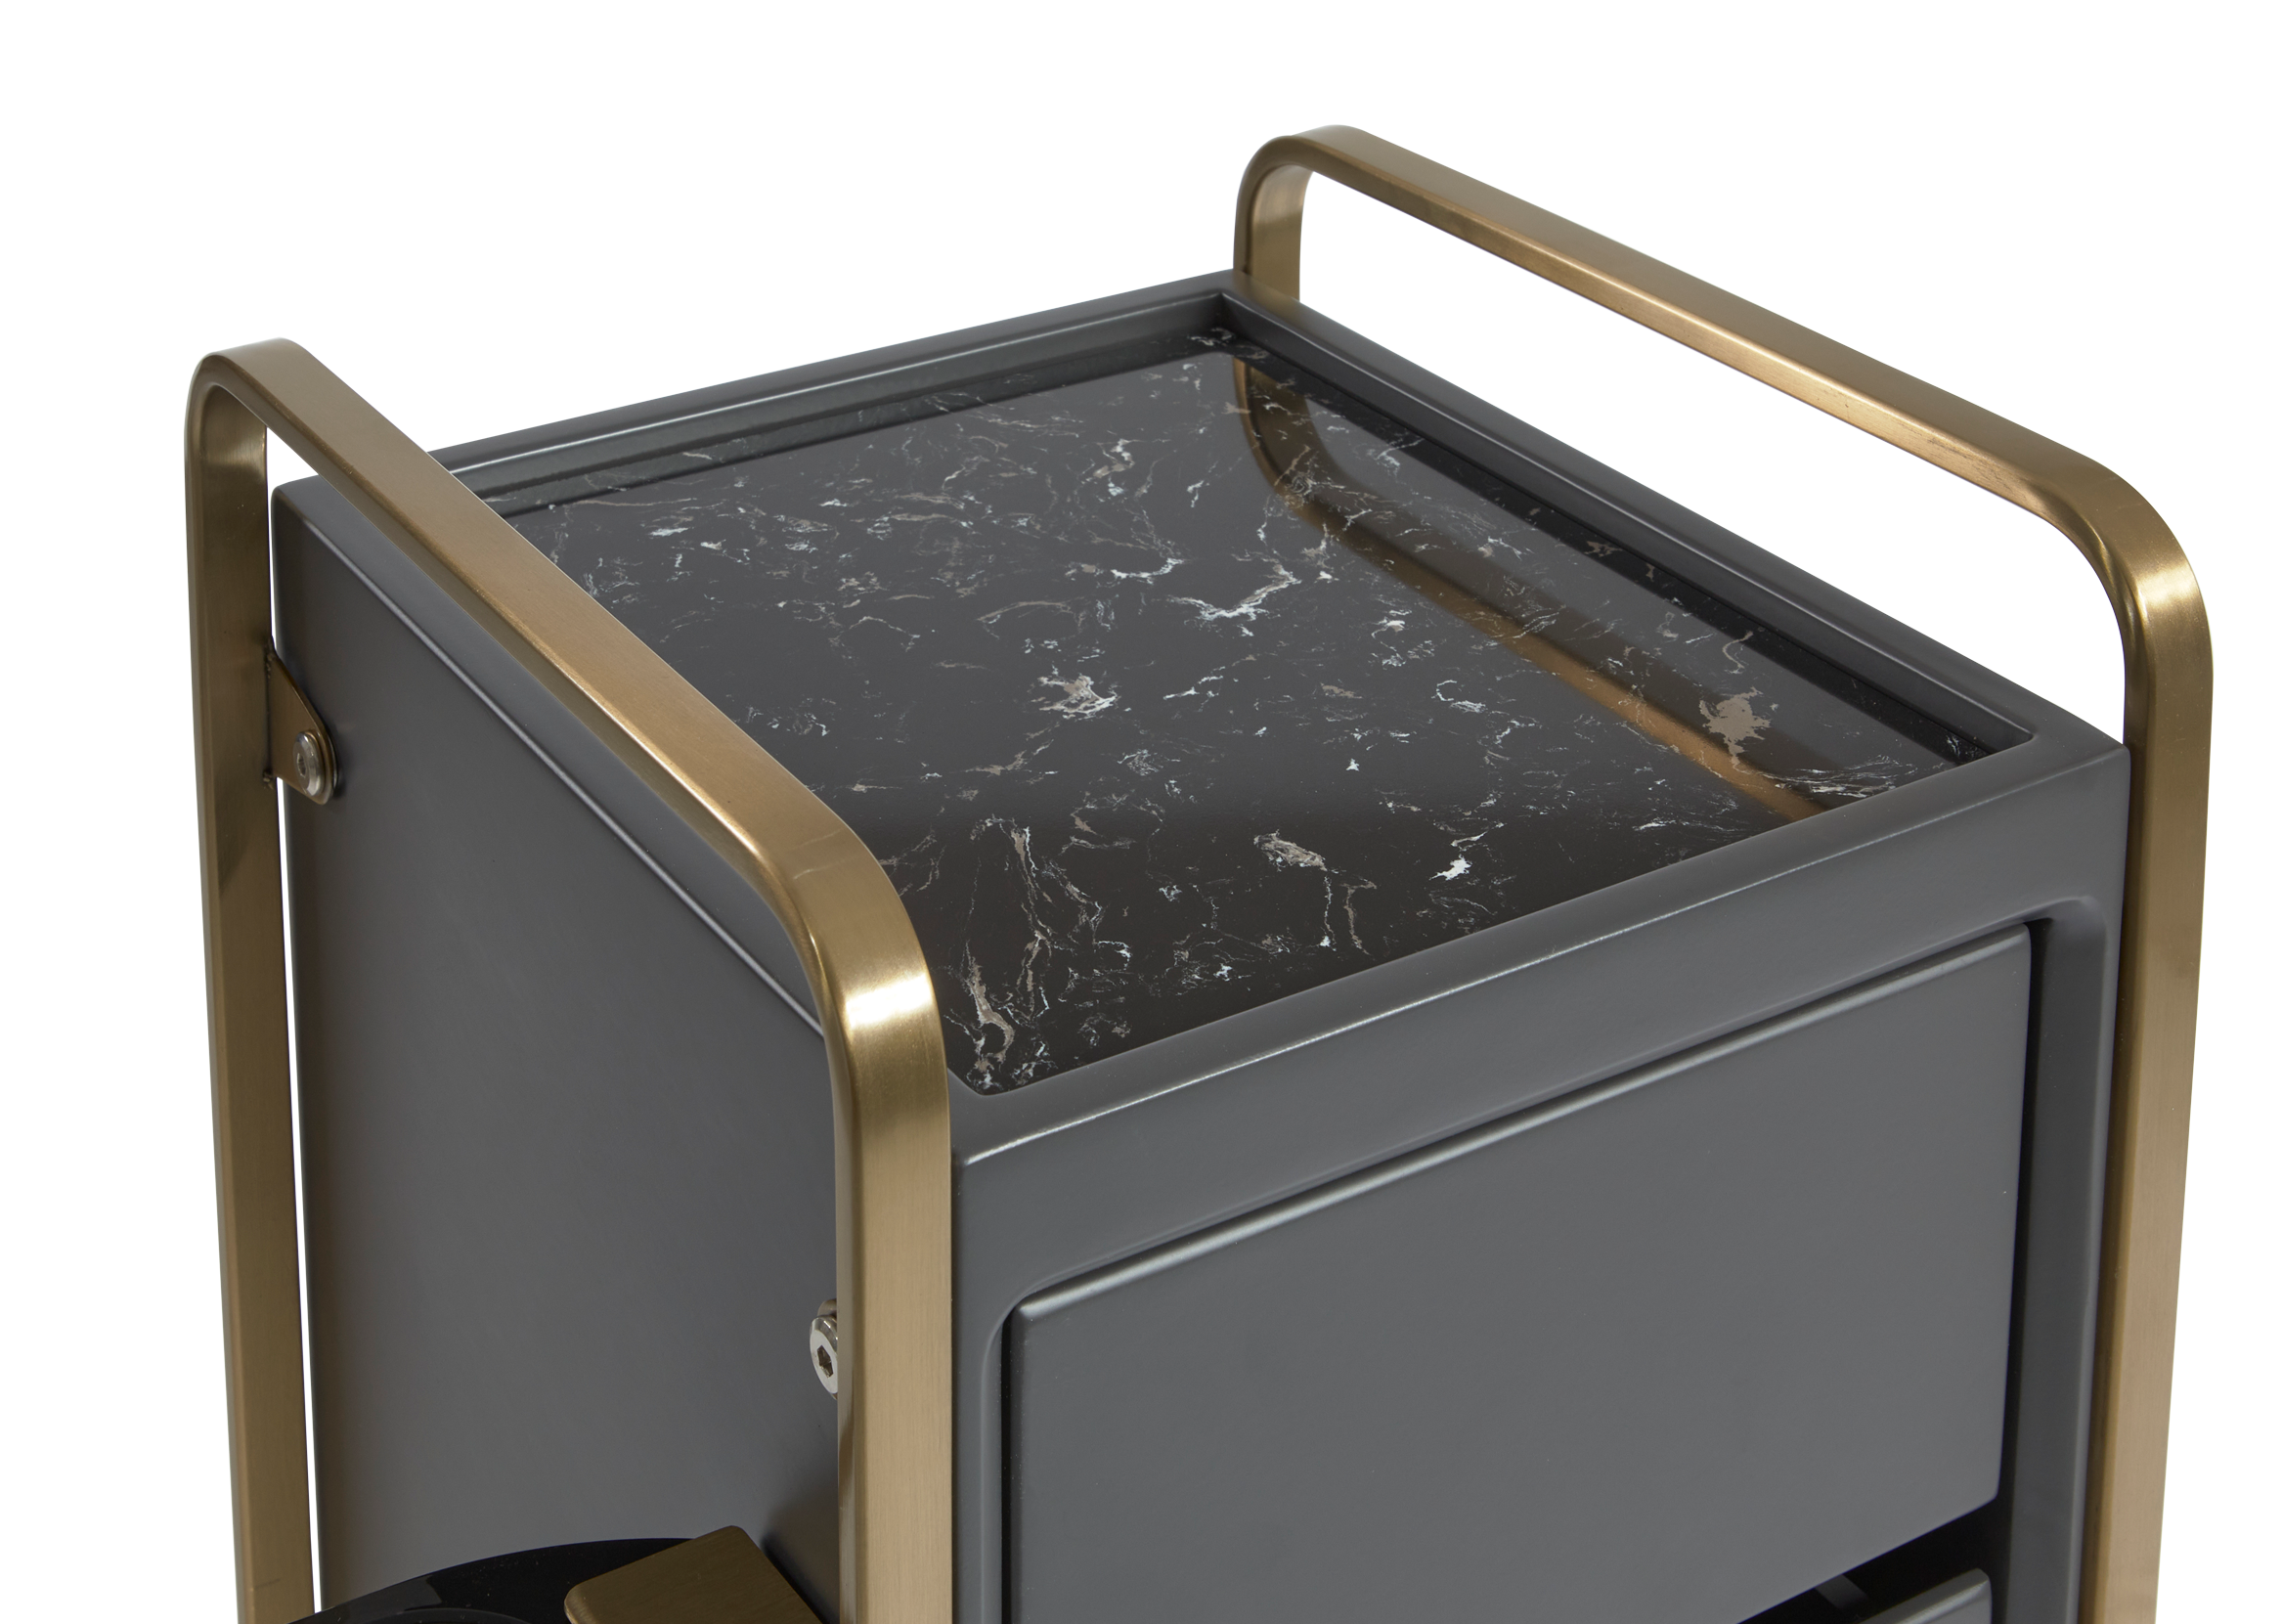 The Sapphire Salon Trolley - Charcoal Black & Gold with Stone Top by SEC